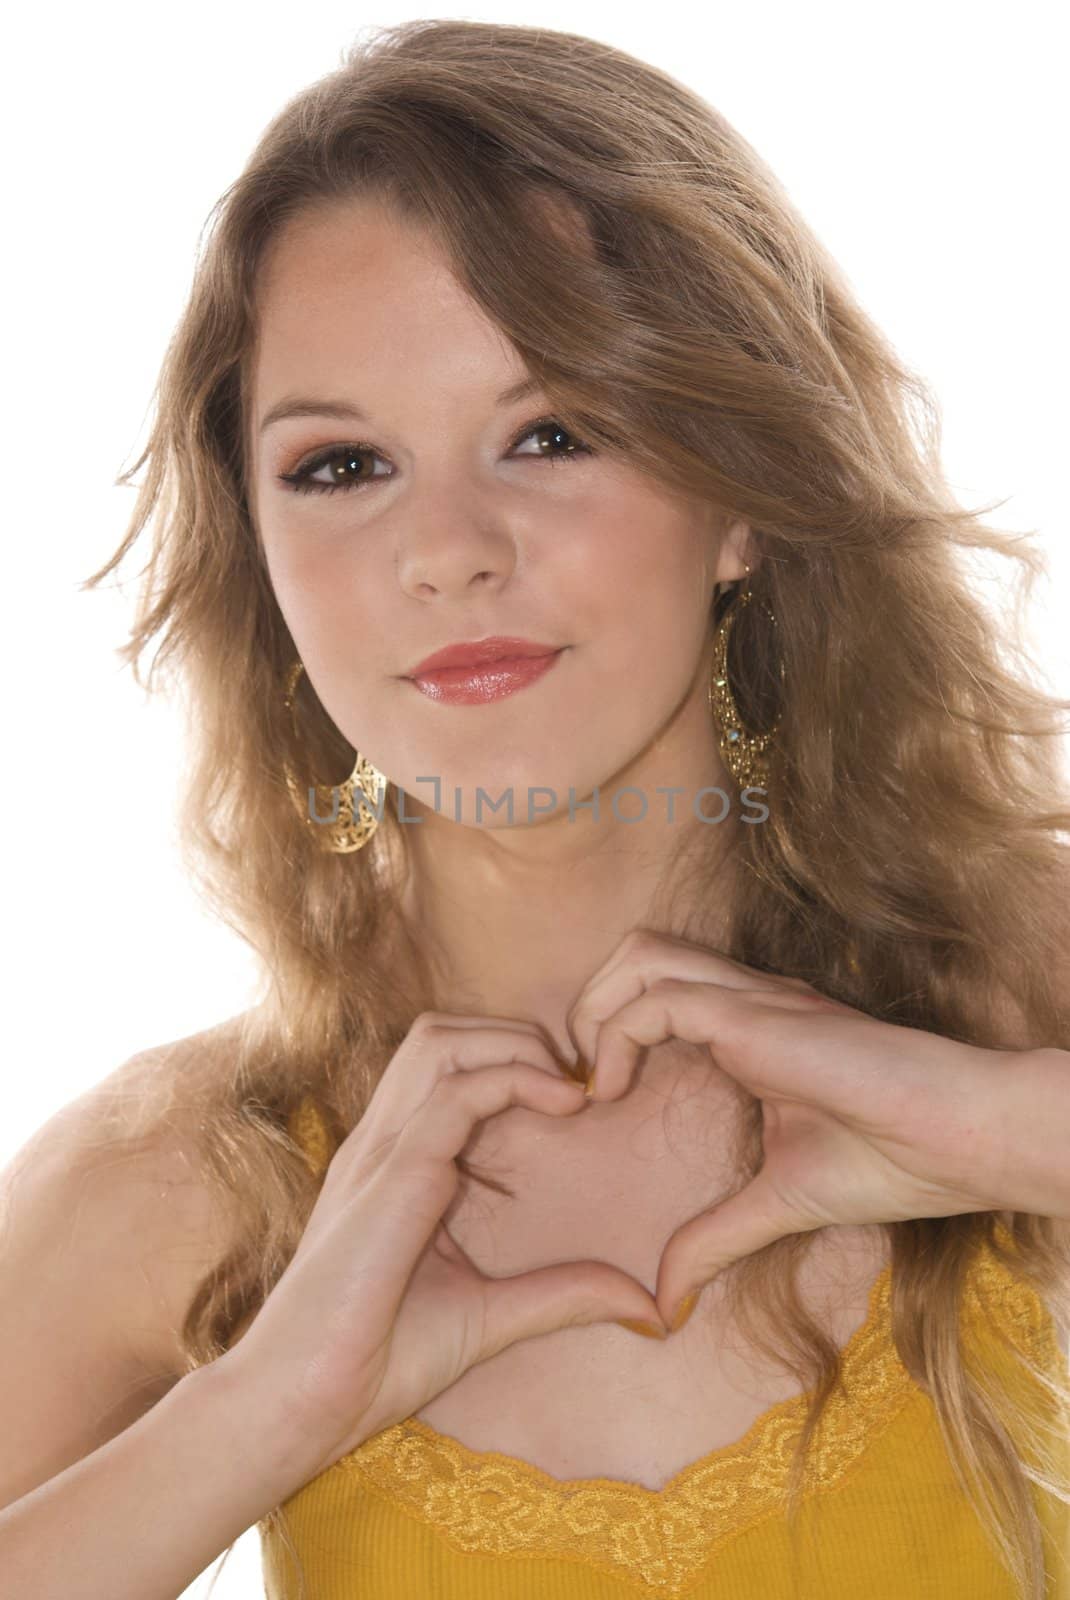 Beautiful Teenager with Hands in Heart Shape by pixelsnap